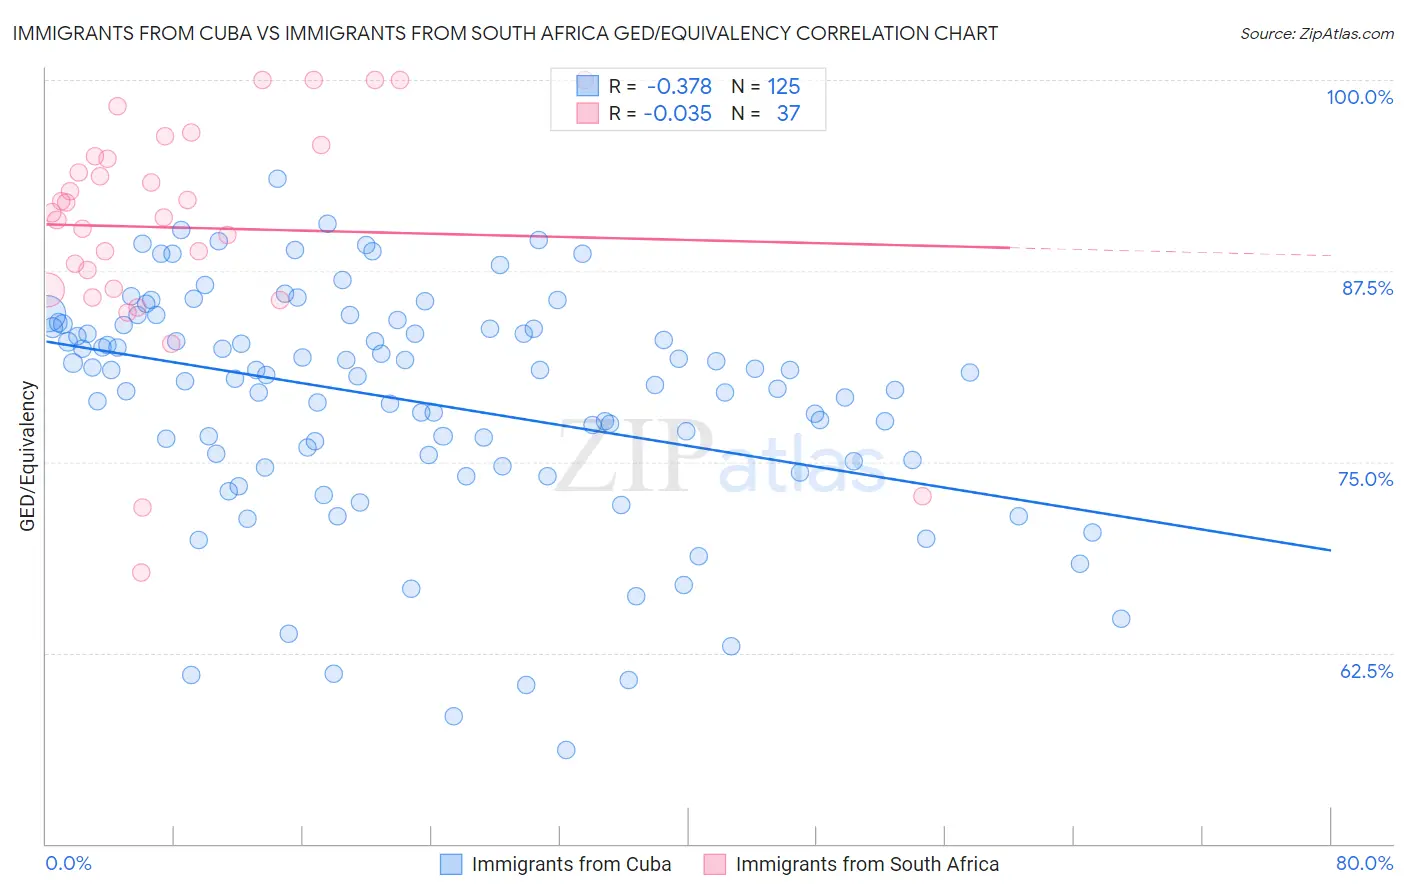 Immigrants from Cuba vs Immigrants from South Africa GED/Equivalency